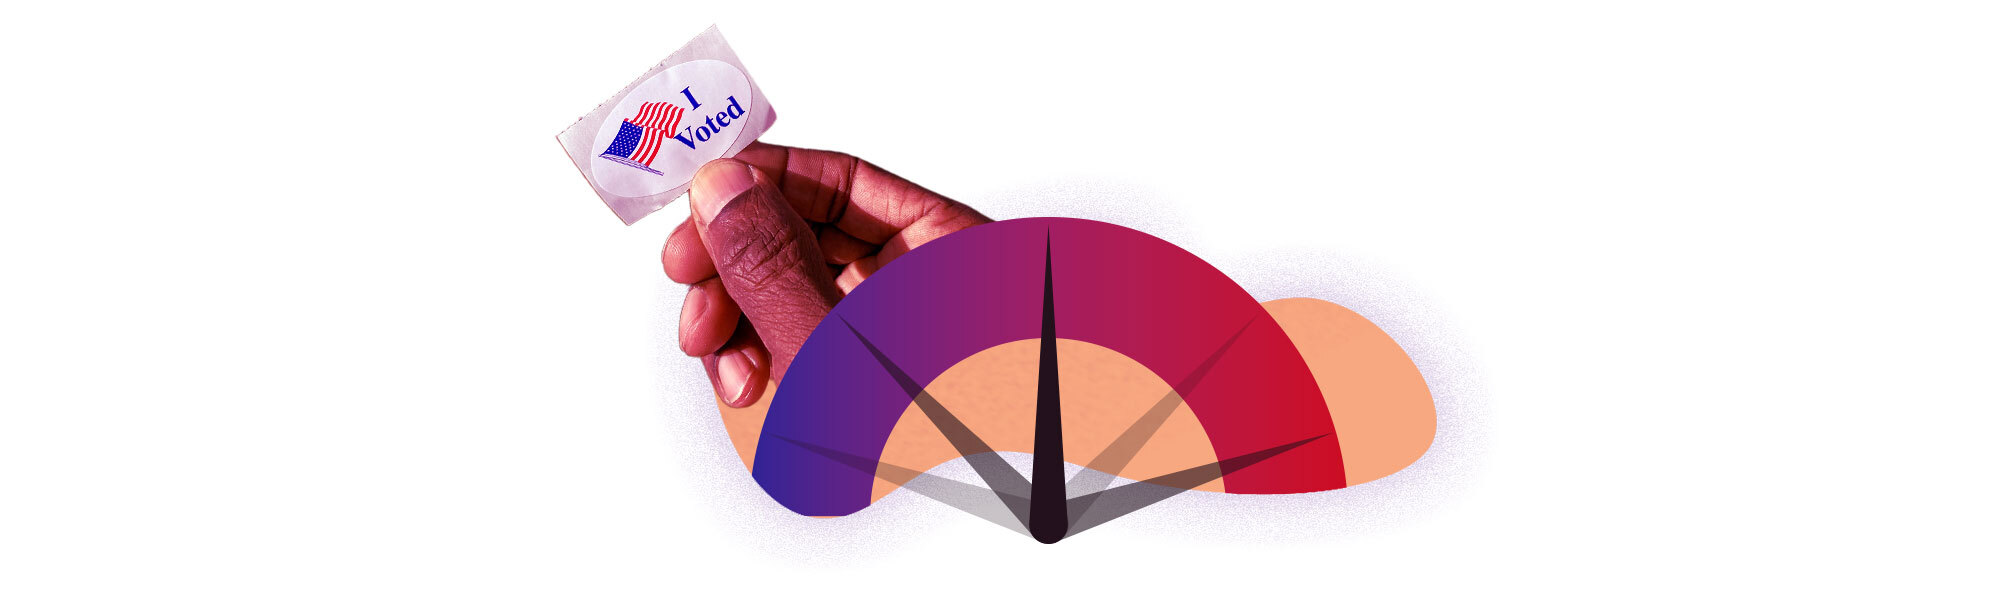 An illustration shows a scale swinging back and forth between blue and red, as well as a hand holding an I Voted sticker.